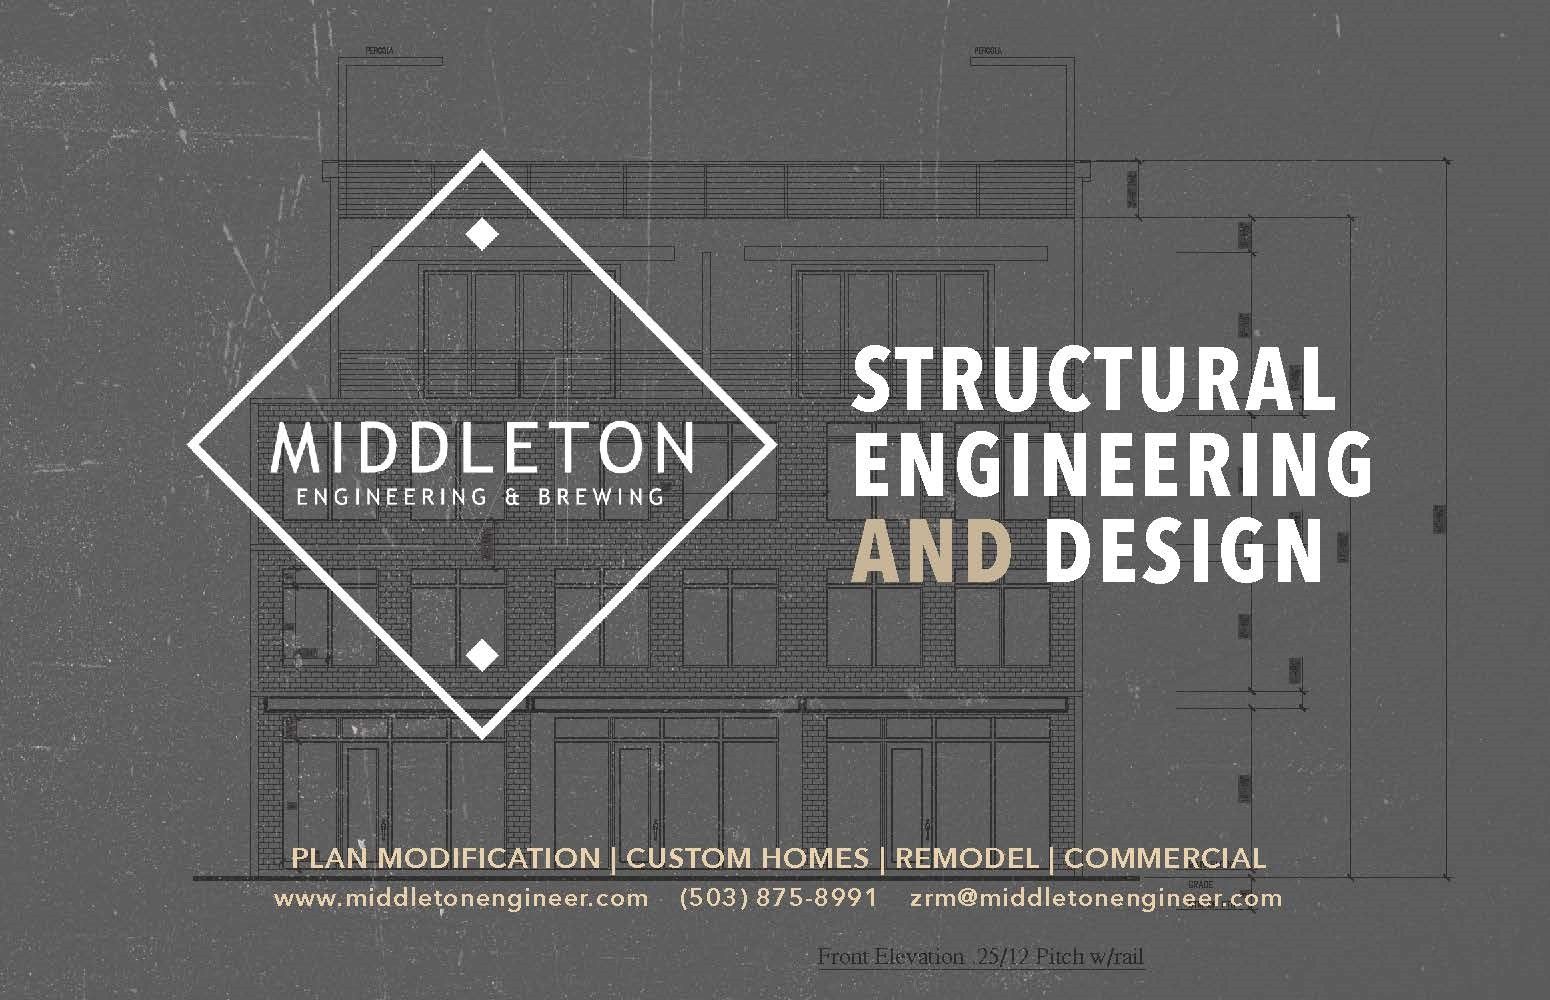 a poster for middleton structural engineering and design